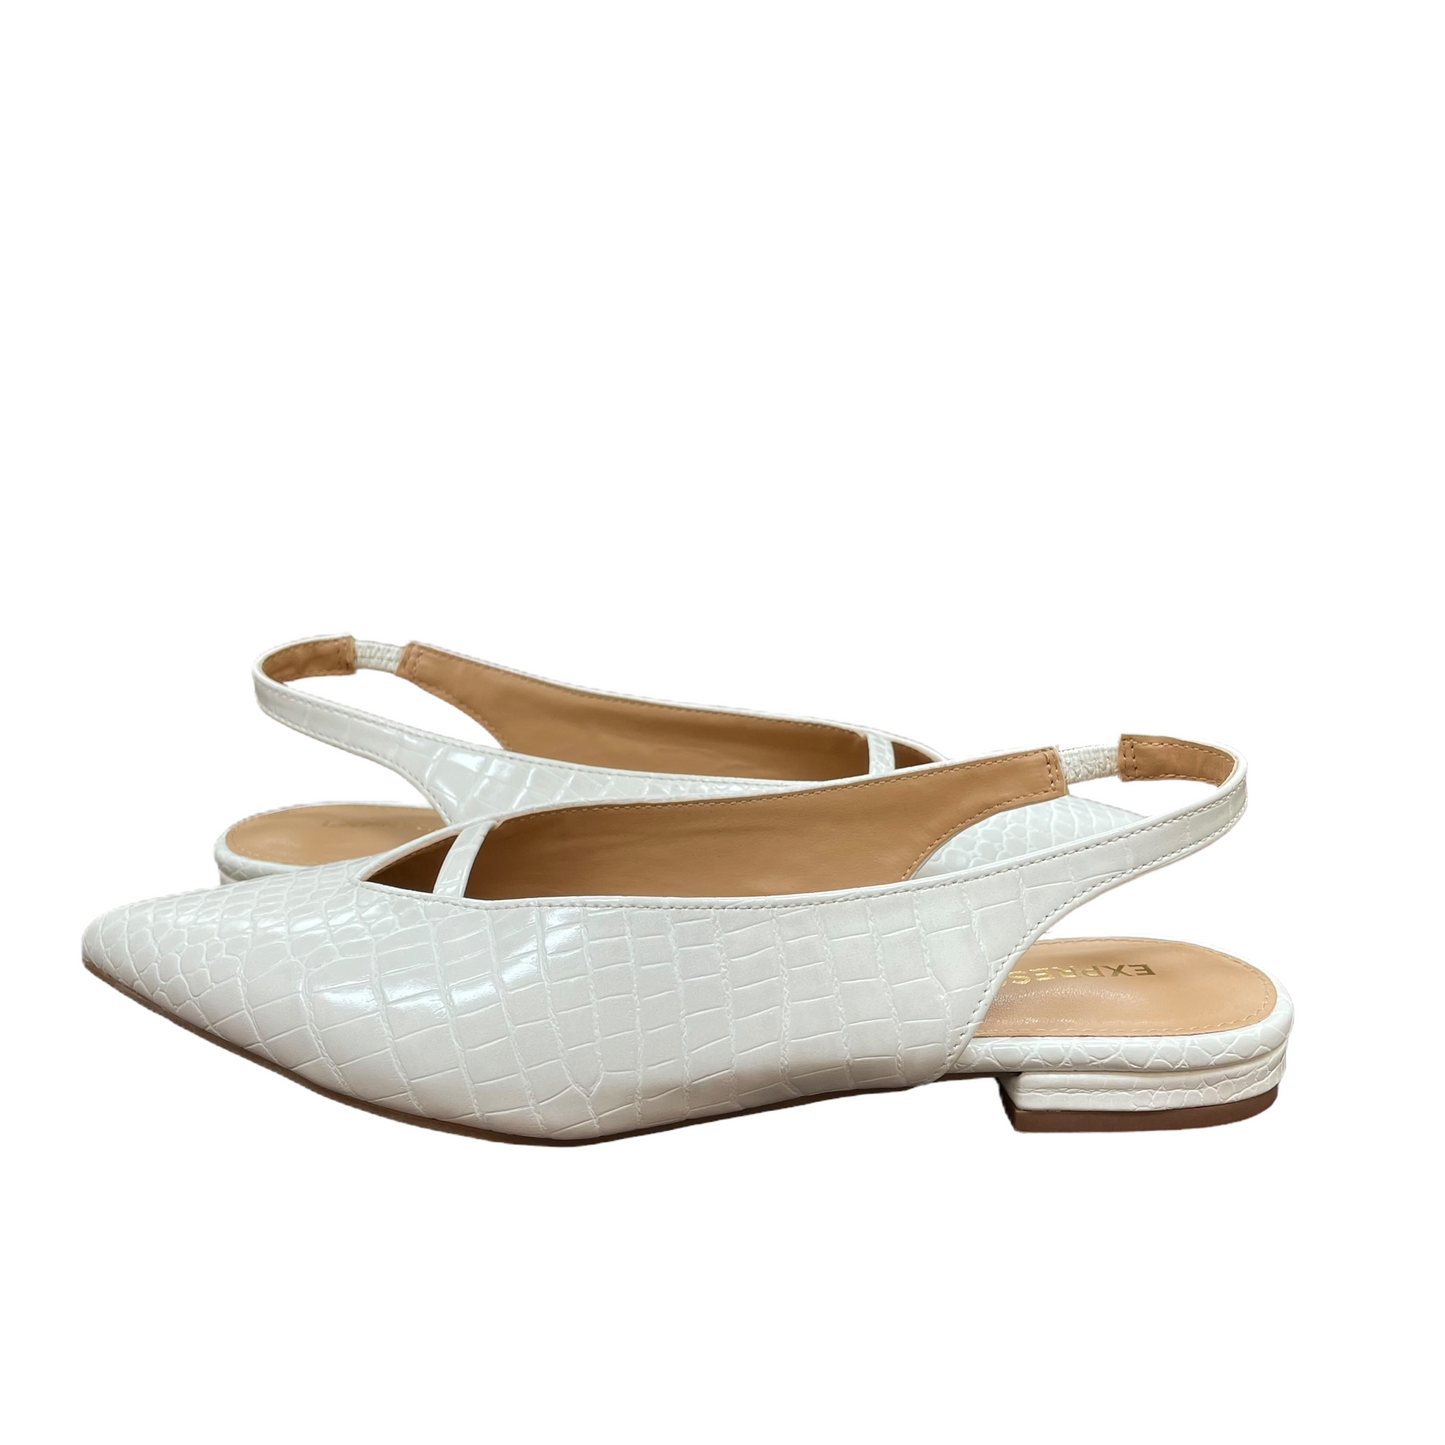 White Shoes Flats By Express, Size: 7